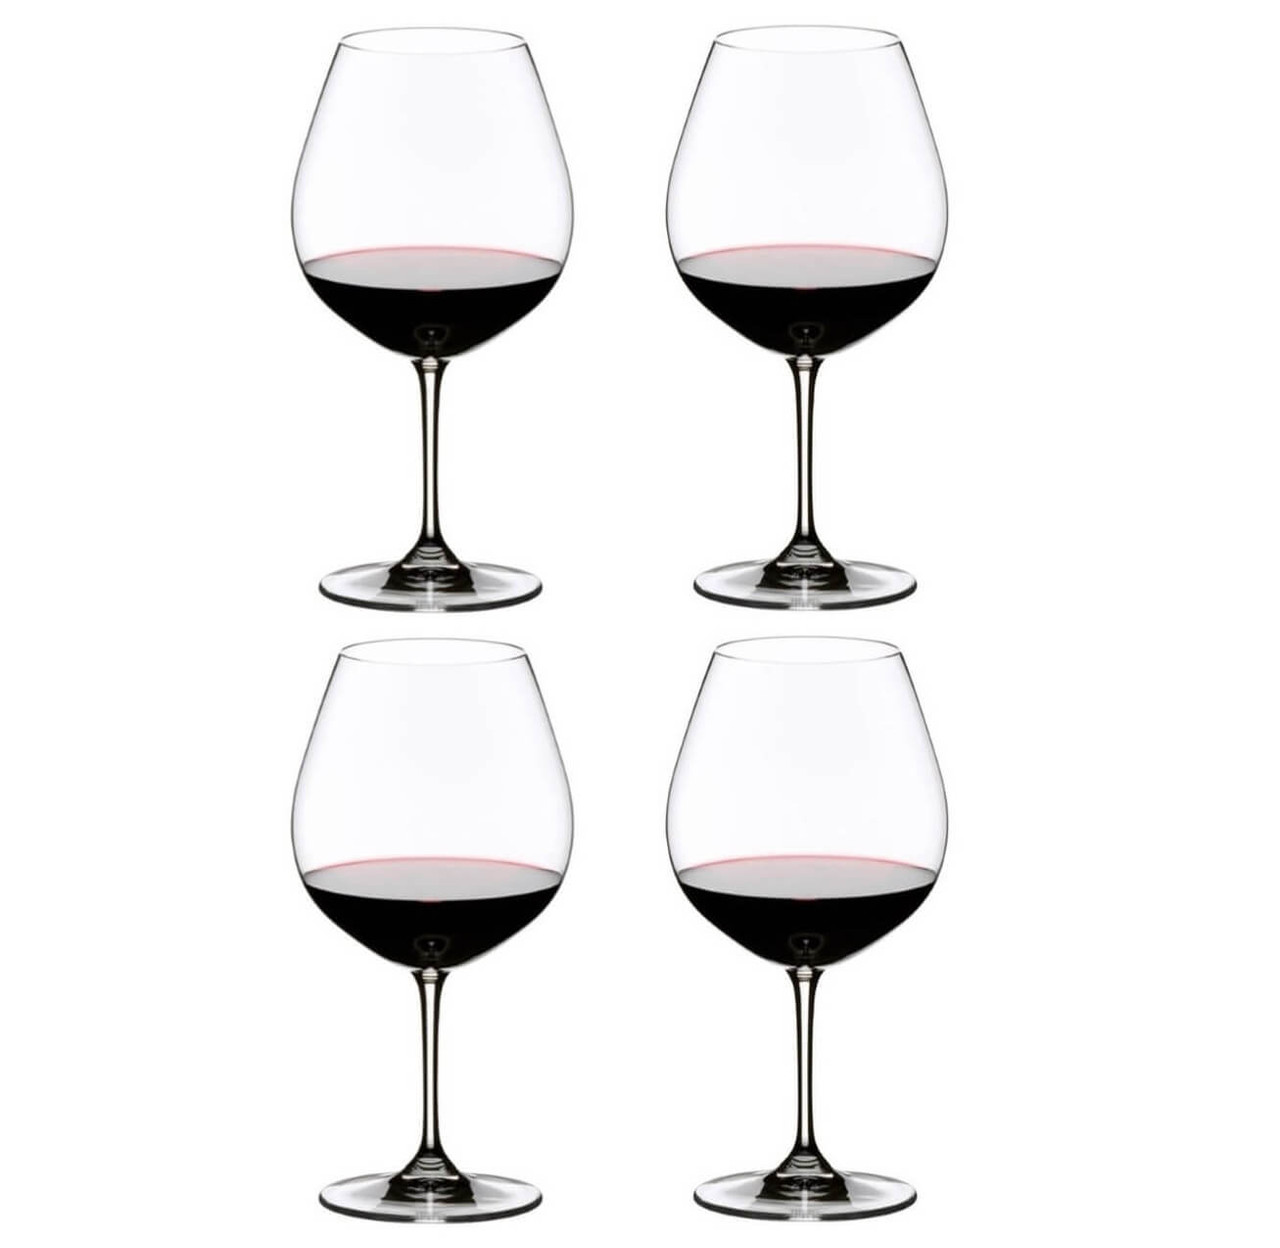 https://cdn11.bigcommerce.com/s-9mnzpxwffi/images/stencil/1280x1280/products/462/2540/Crystal_Stem_Red_Wine_Glasses__29820.1649174939.jpg?c=2